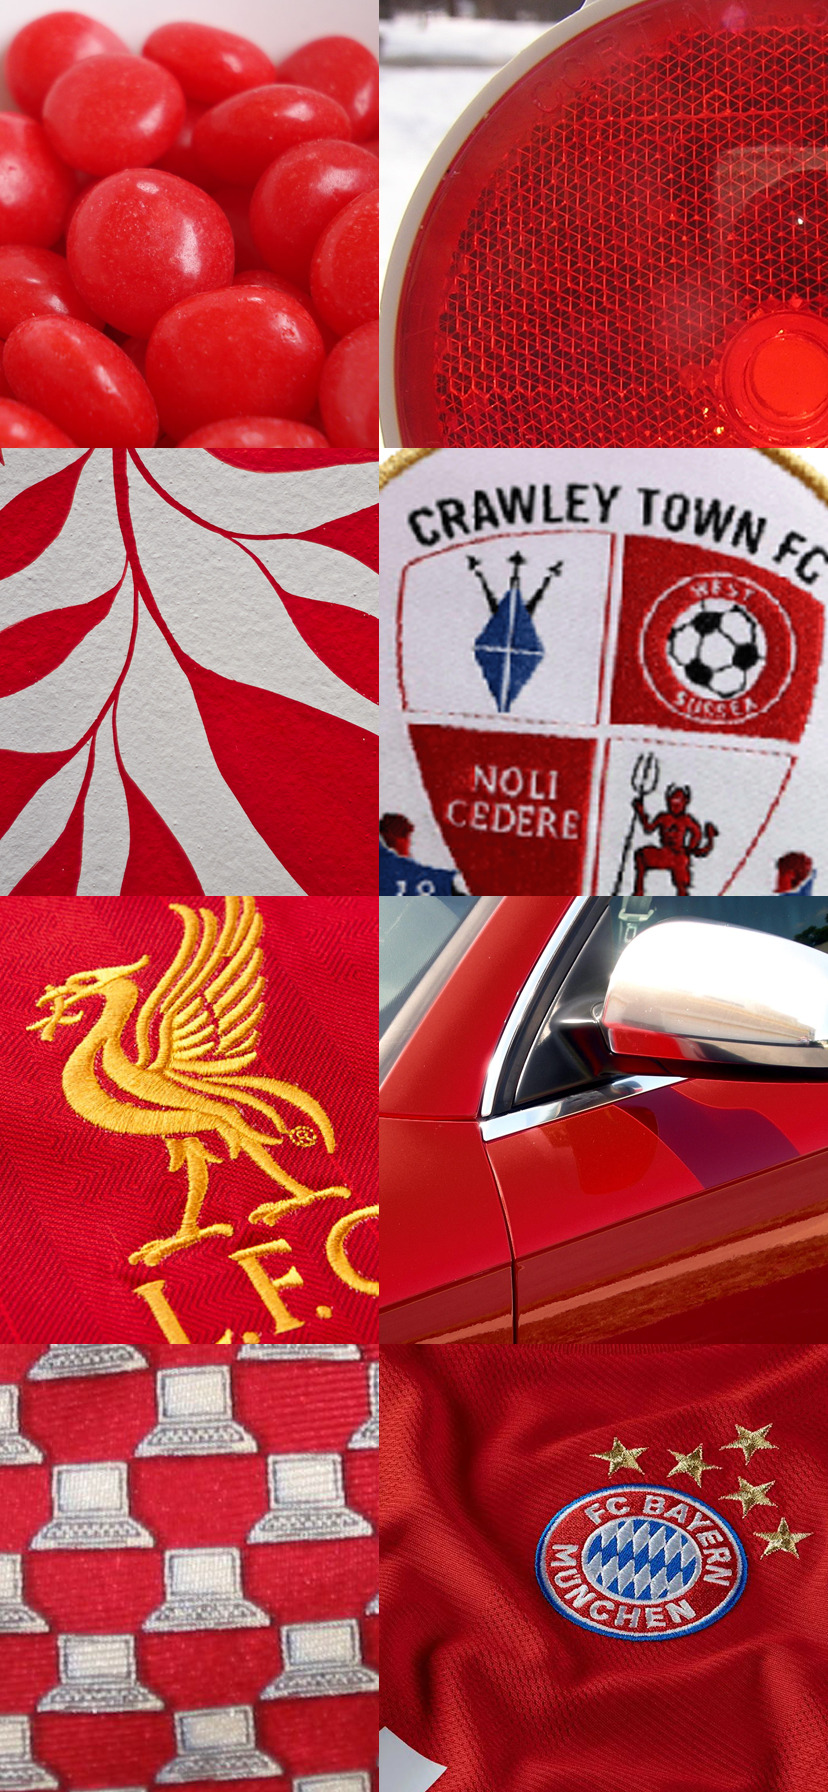 Crawley Town F.C. Wallpapers